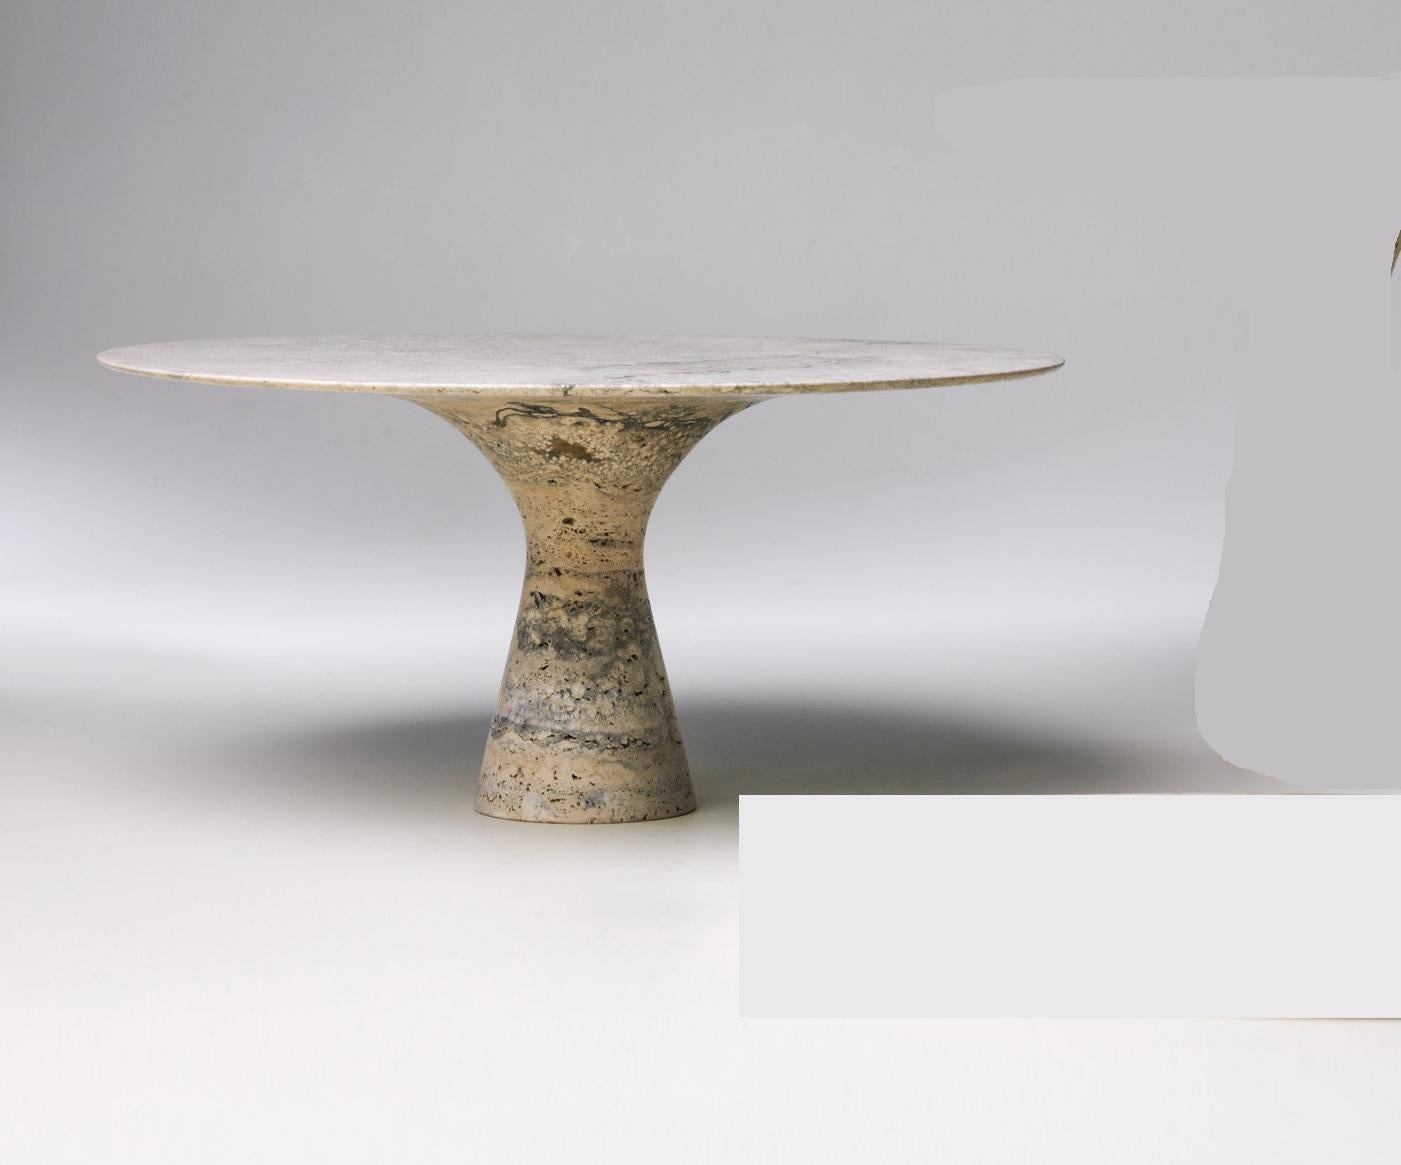 Refined Contemporary marble 02 Travertino silver Marble cake stand
Signed by Leo Aerts.
Dimensions: Diameter 32 x H 15 cm 
Material: Travertino Silver Marble
Technique: Polished, Carved. 
Available in Marble: Kyknos, Bianco Statuarietto, Grey